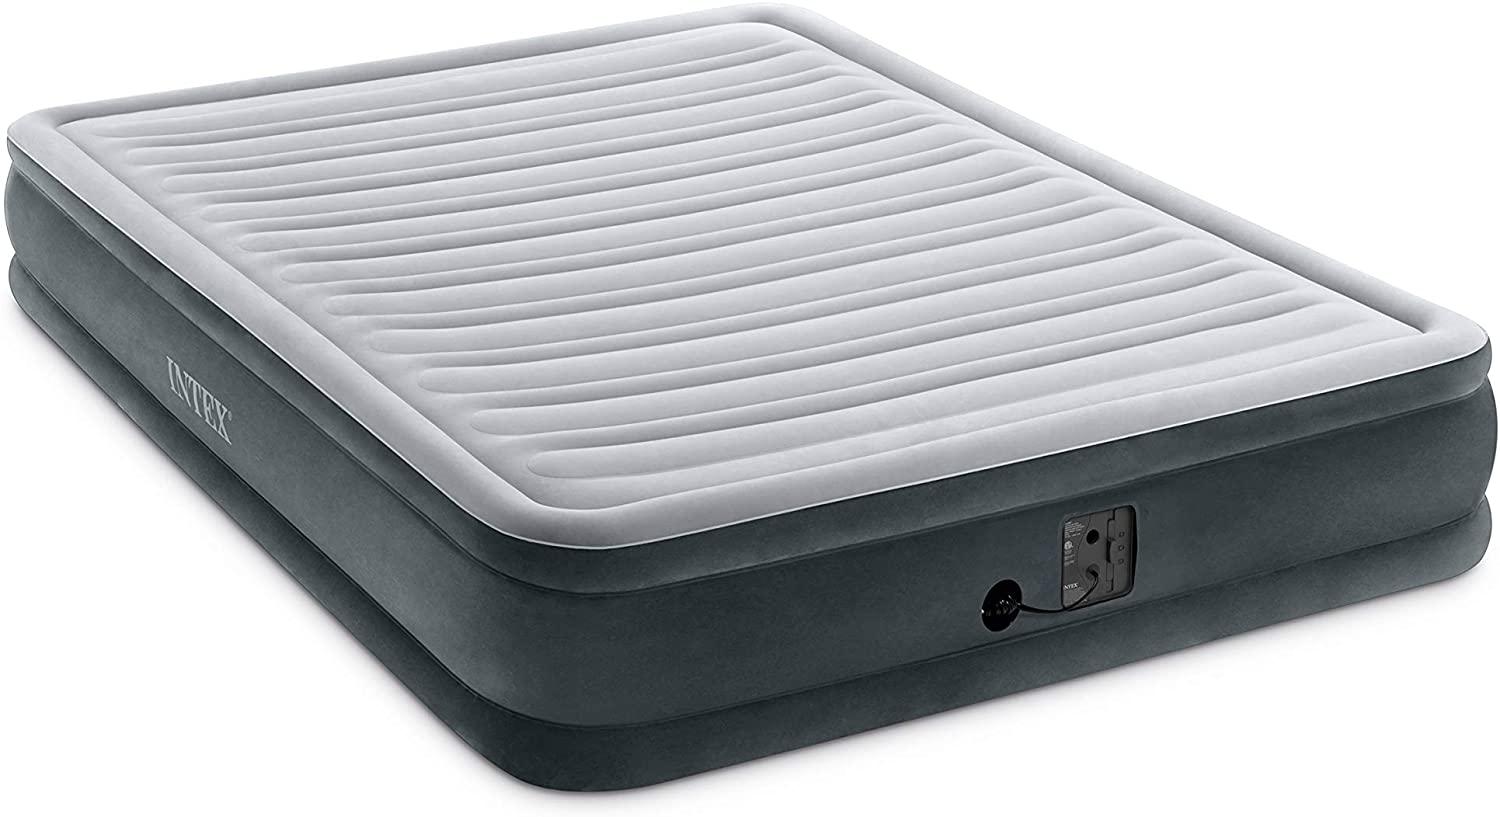 Intex Dura-Beam Deluxe Comfort Plush Airbed for $30.37 Shipped